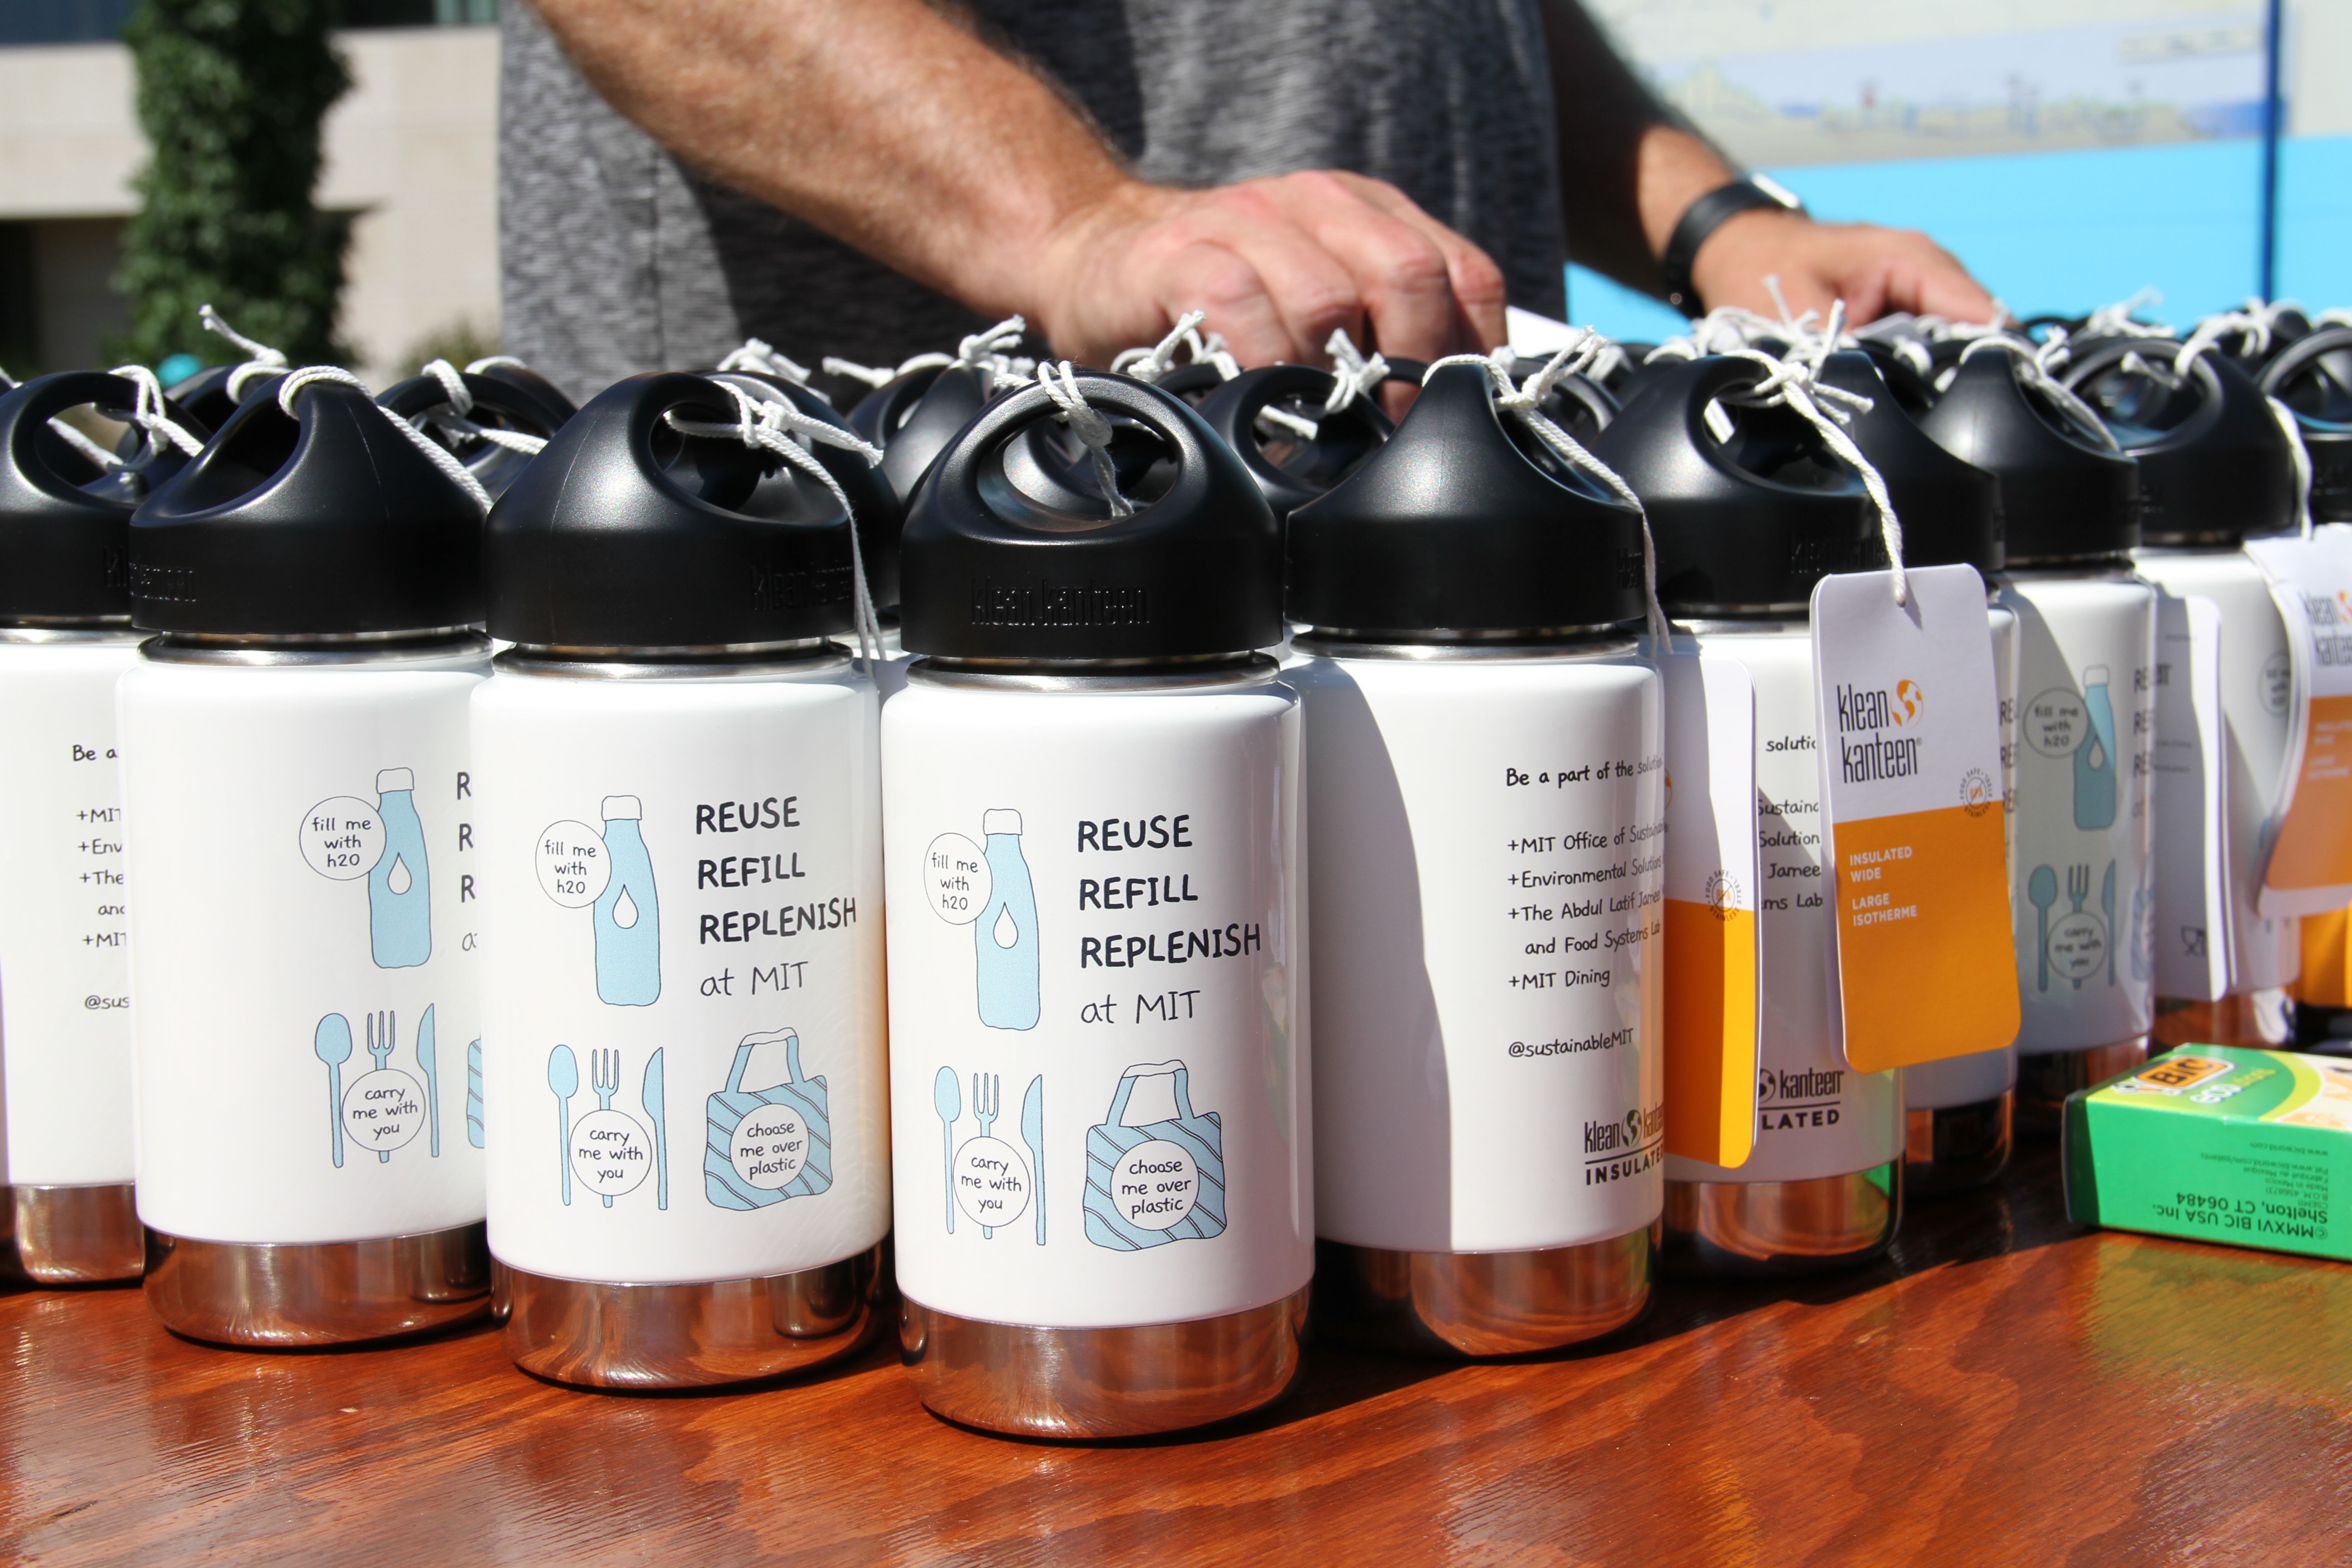 First-year students encouraged to “reuse, refill, replenish”